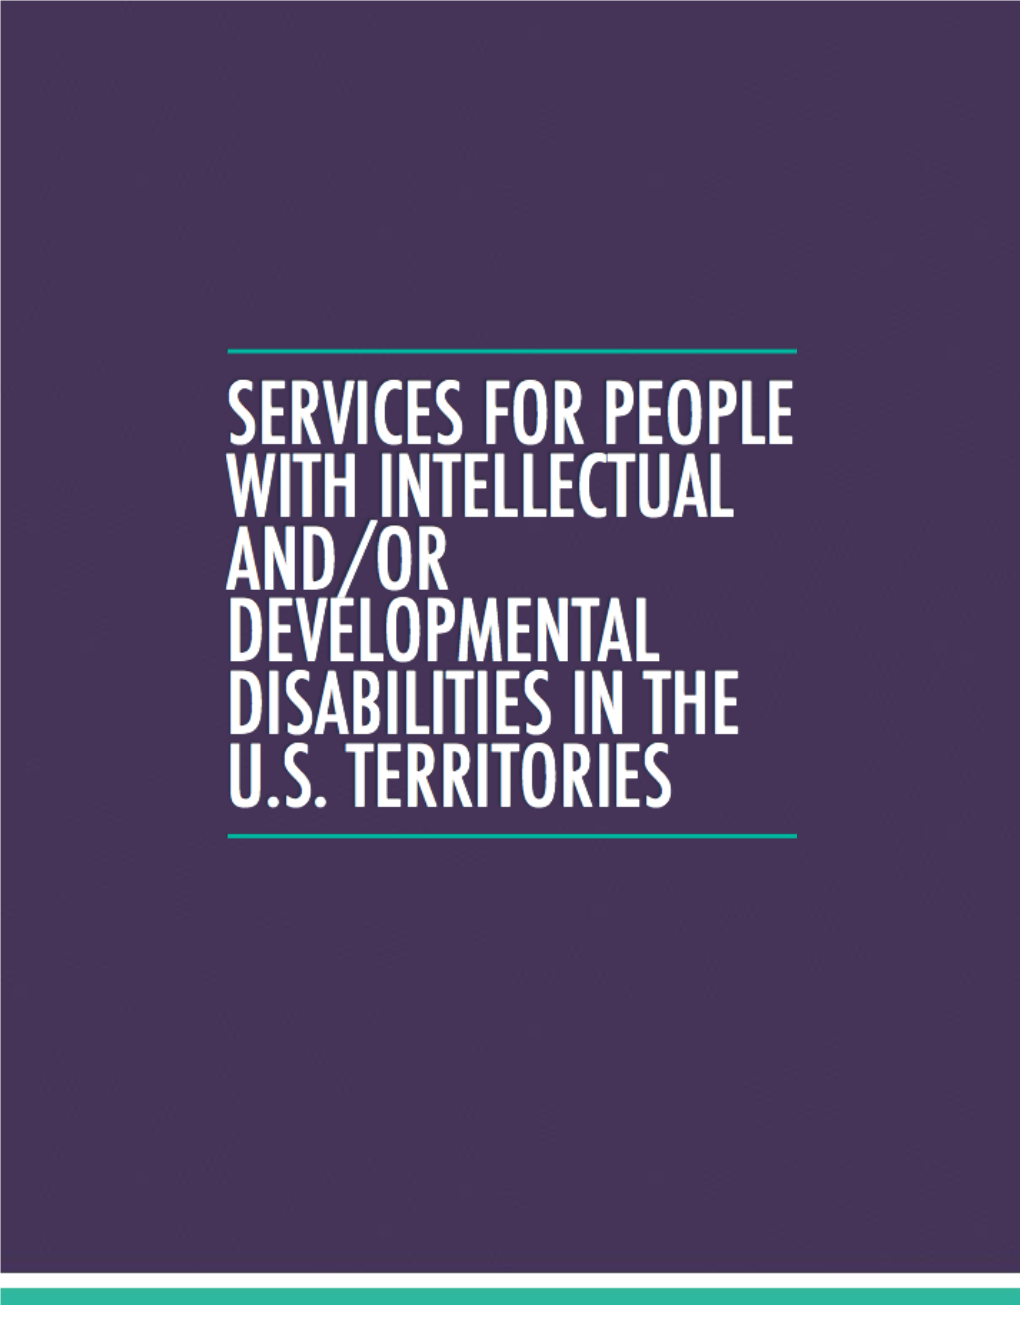 Services for People with Intellectual And/Or Developmental Disabilities in the U.S. Territories